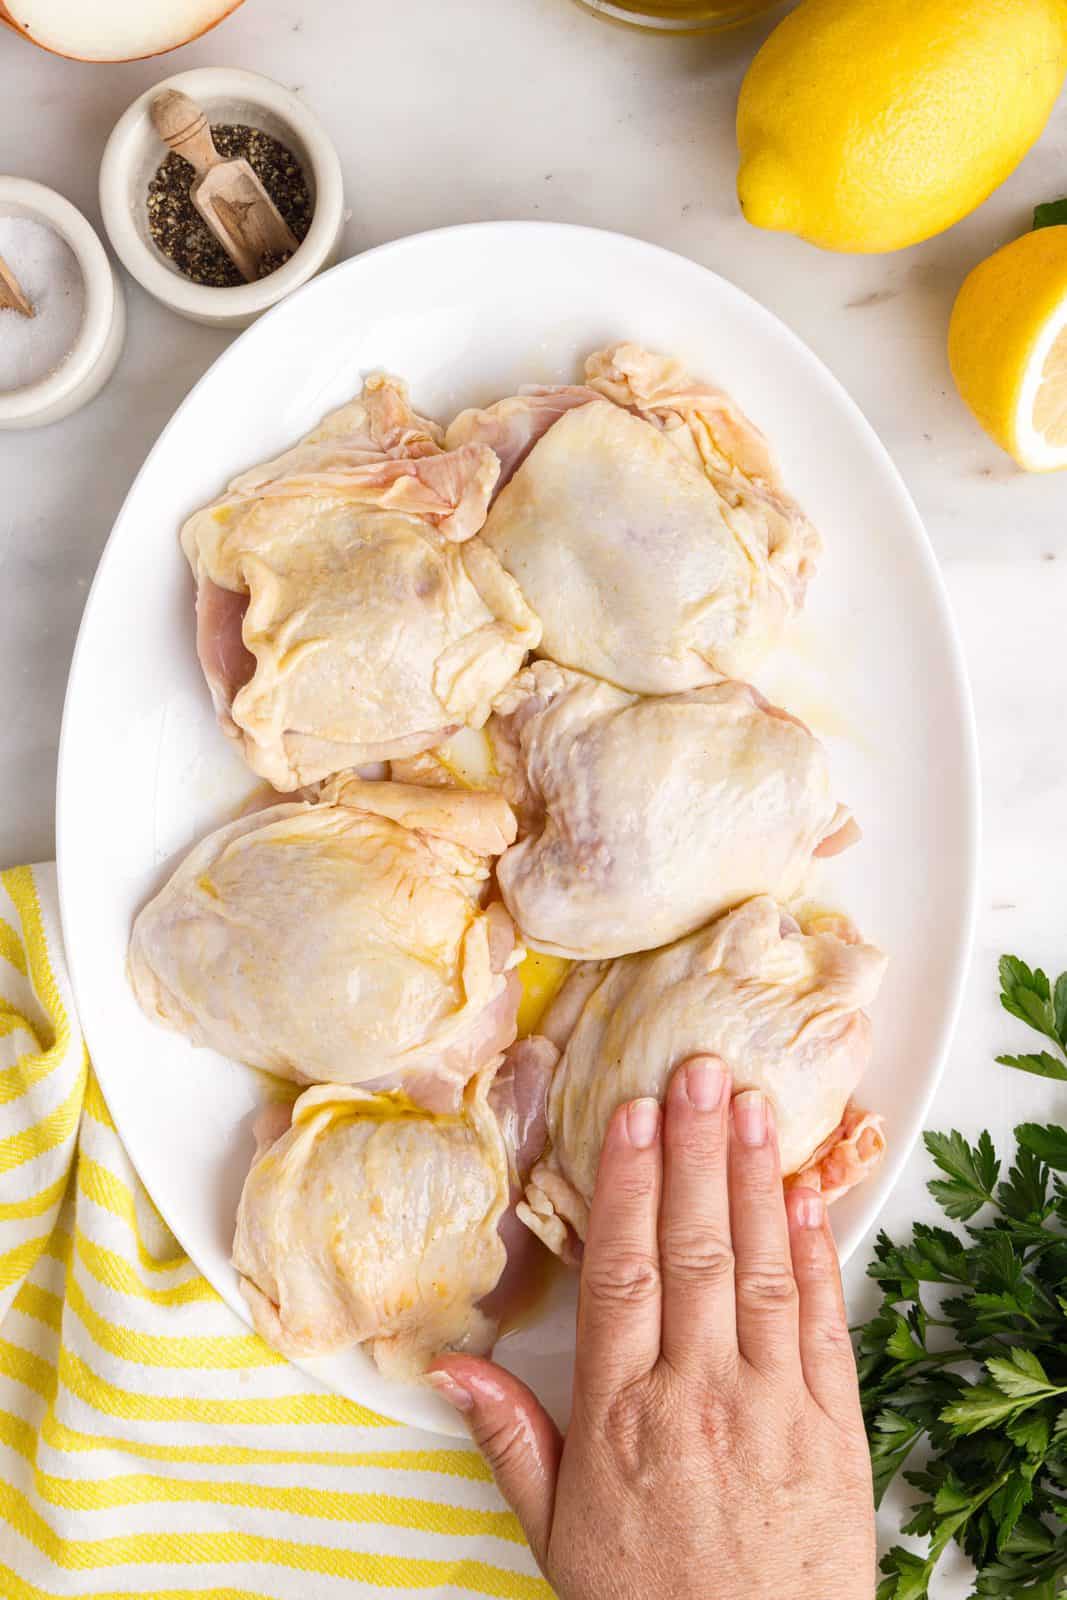 Hand rubbing oil and lemon mixture over chicken thighs.